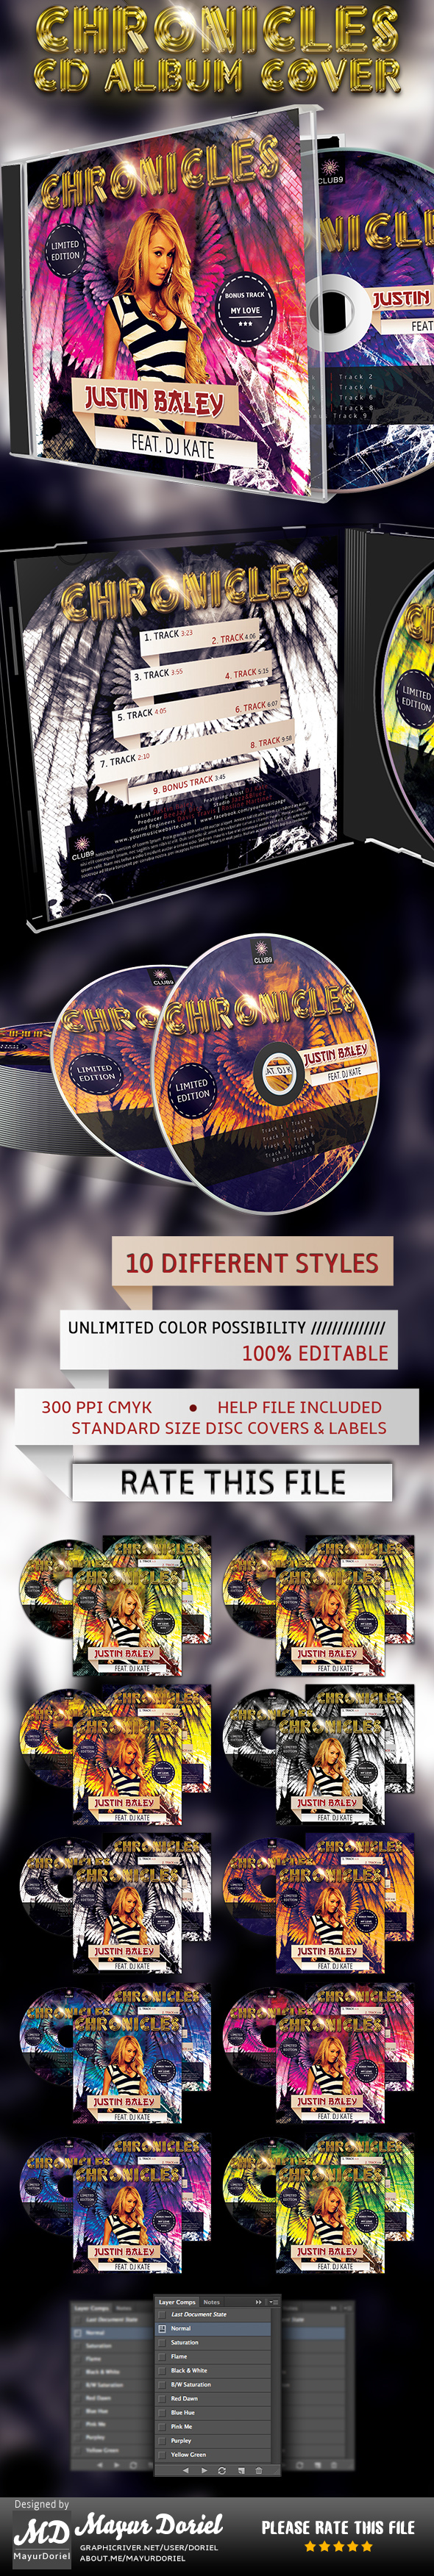 graphicriver chronicles cd cover Album compactdisc Label abstract